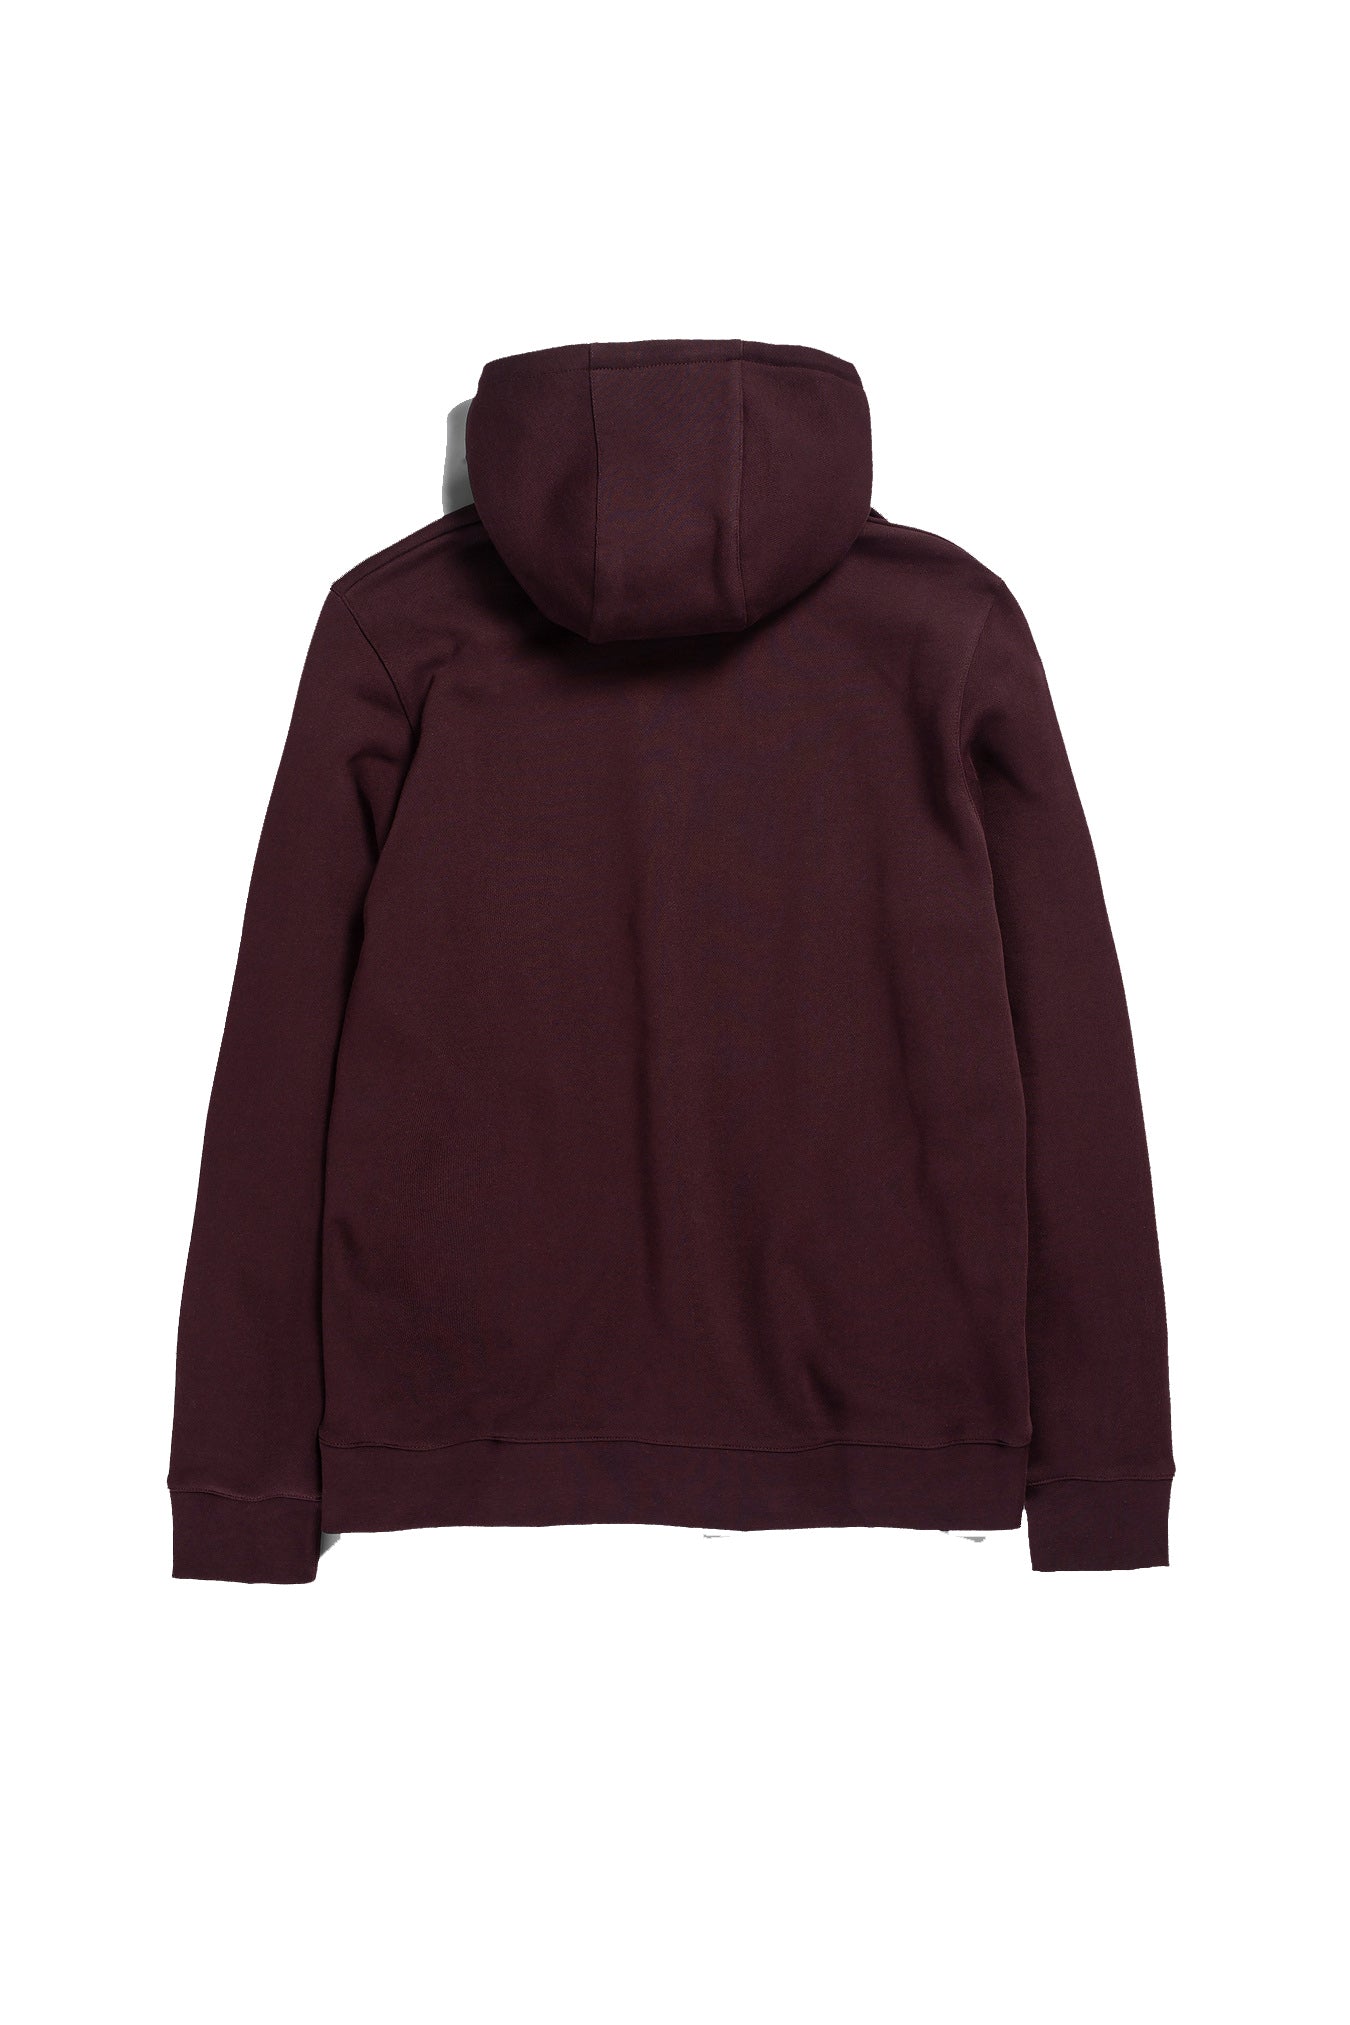 Vagn Classic Hood BURGUNDY
A slim fitting hoodie with set-in sleeves and cut in a regular fit with a diagonal, loopback organic cotton fleece. Featuring an adjustable, double-layer drawstring hood with metal aglets, kangaroo pocket and finished with ribbing at the cuffs and hem.Style-no: N20-1276— 100% organic cotton— 400 GSM — Slim fit — Made in Portugal NORSE PROJECTS